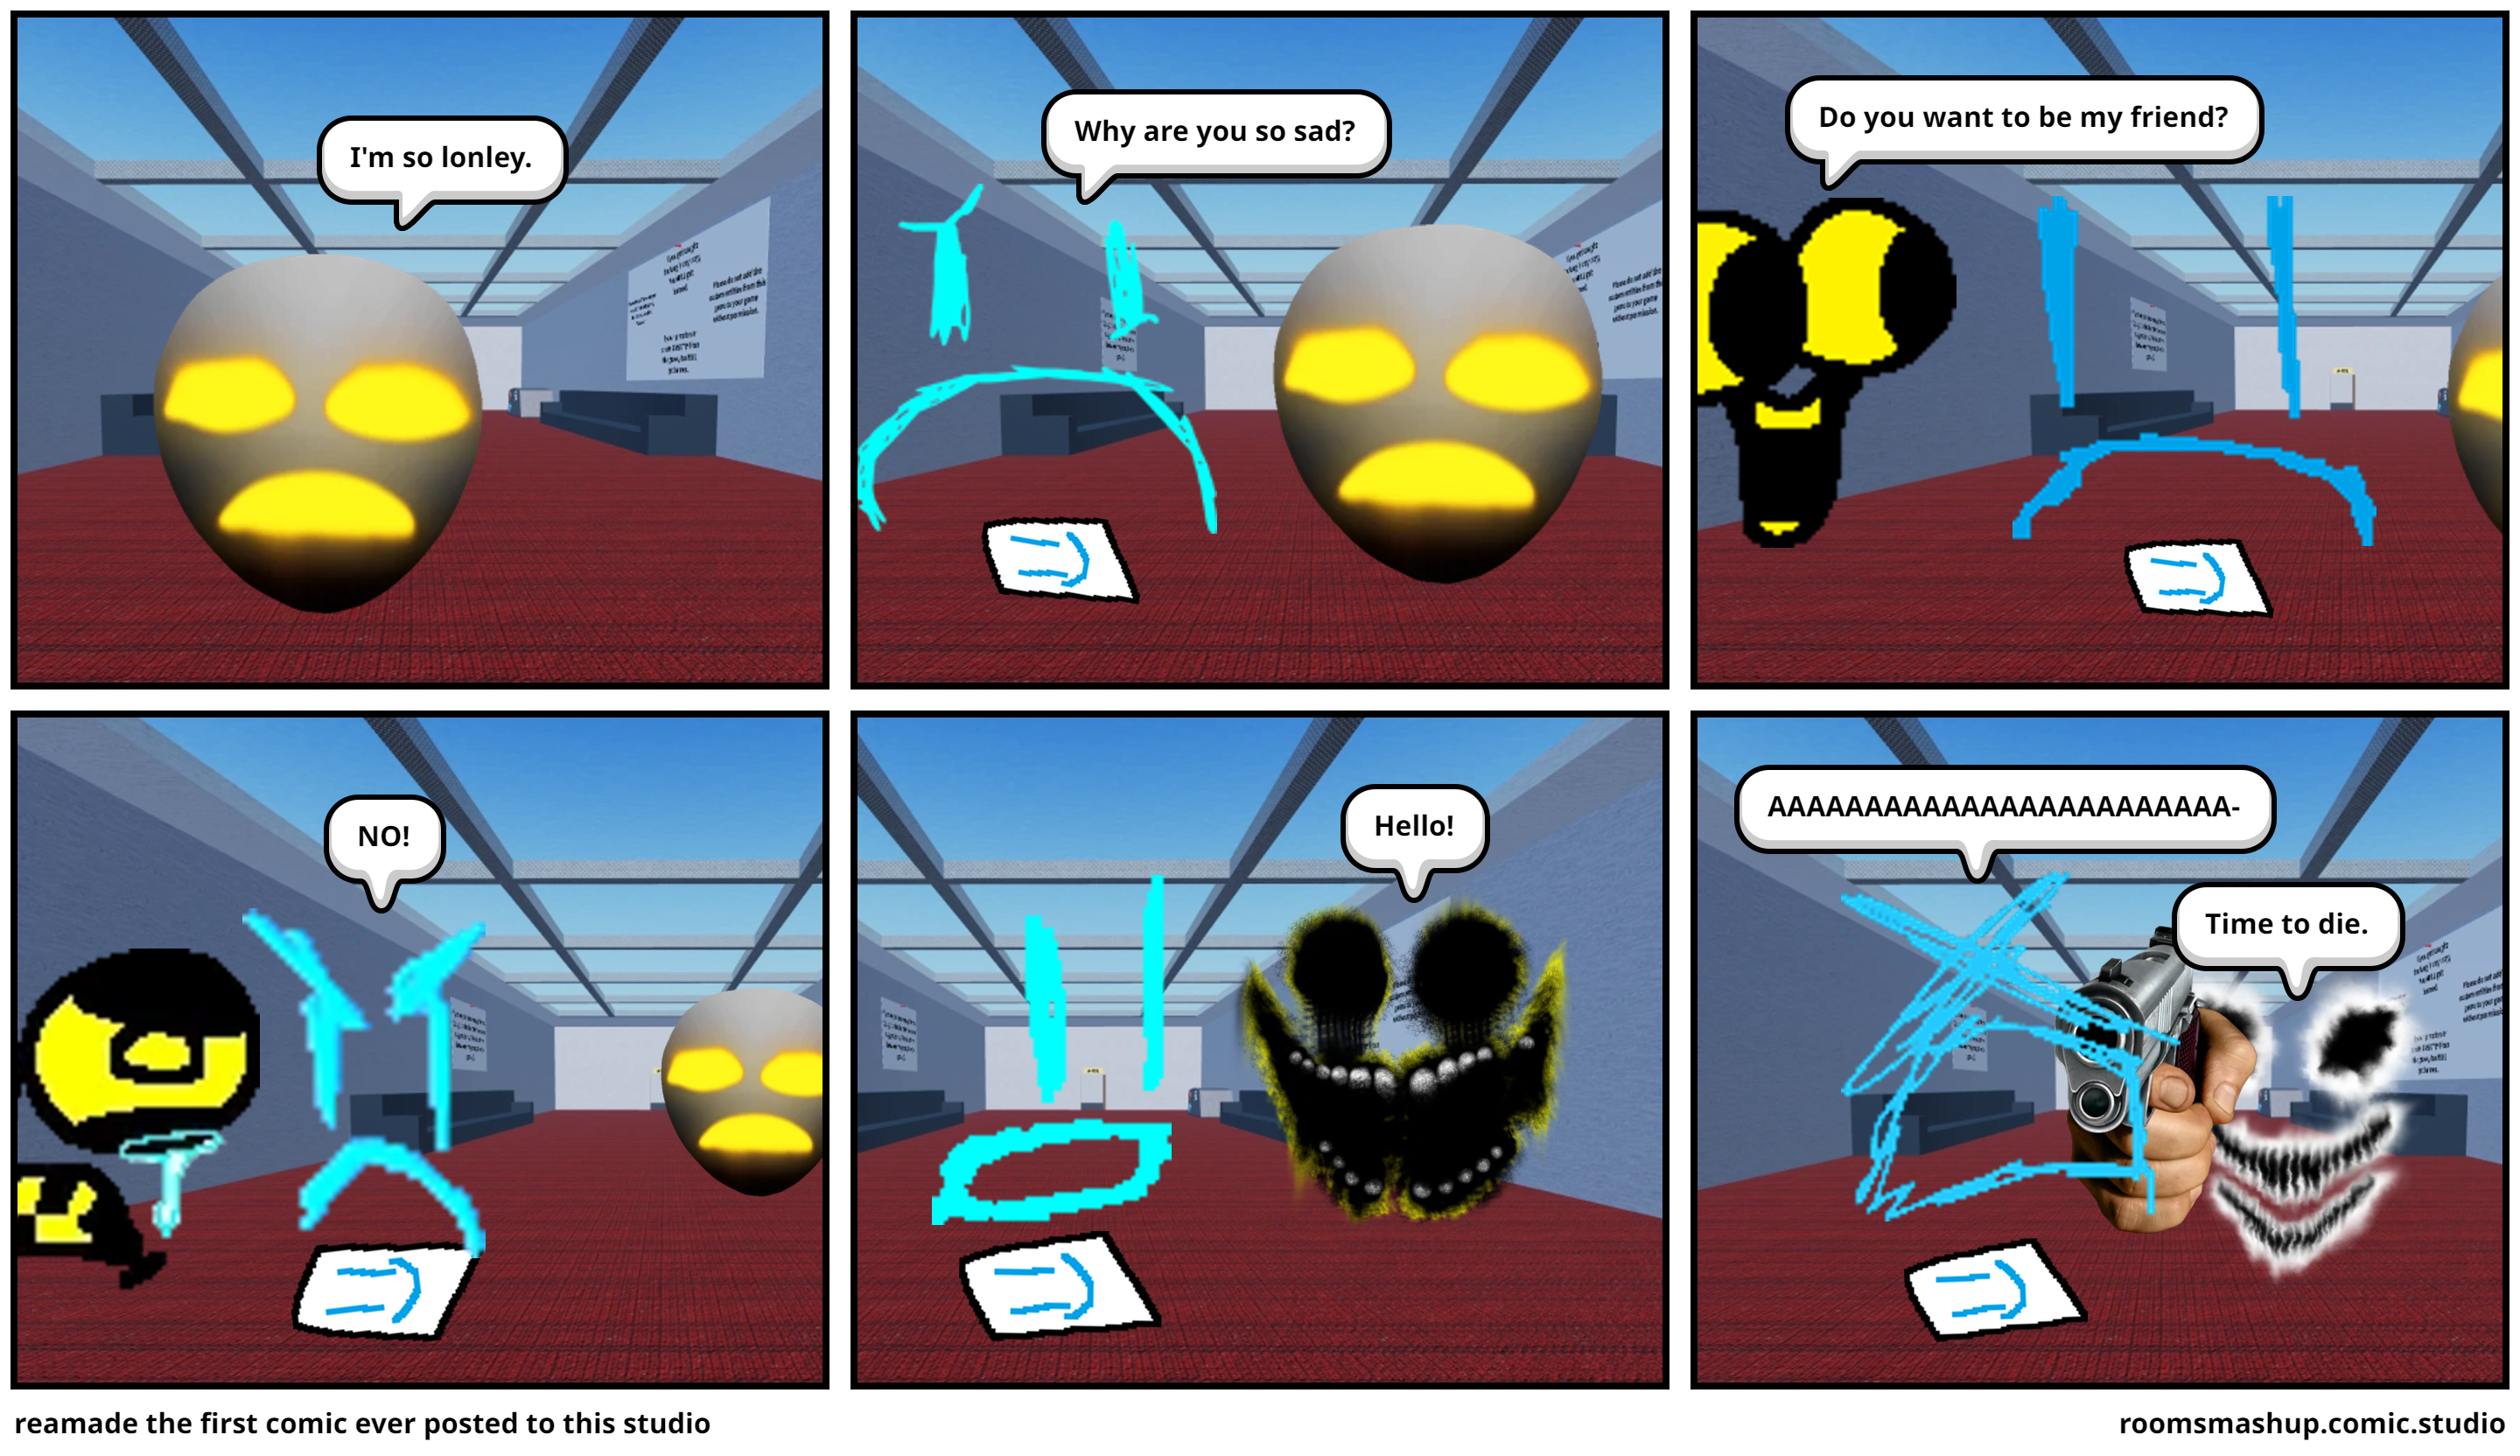 reamade the first comic ever posted to this studio